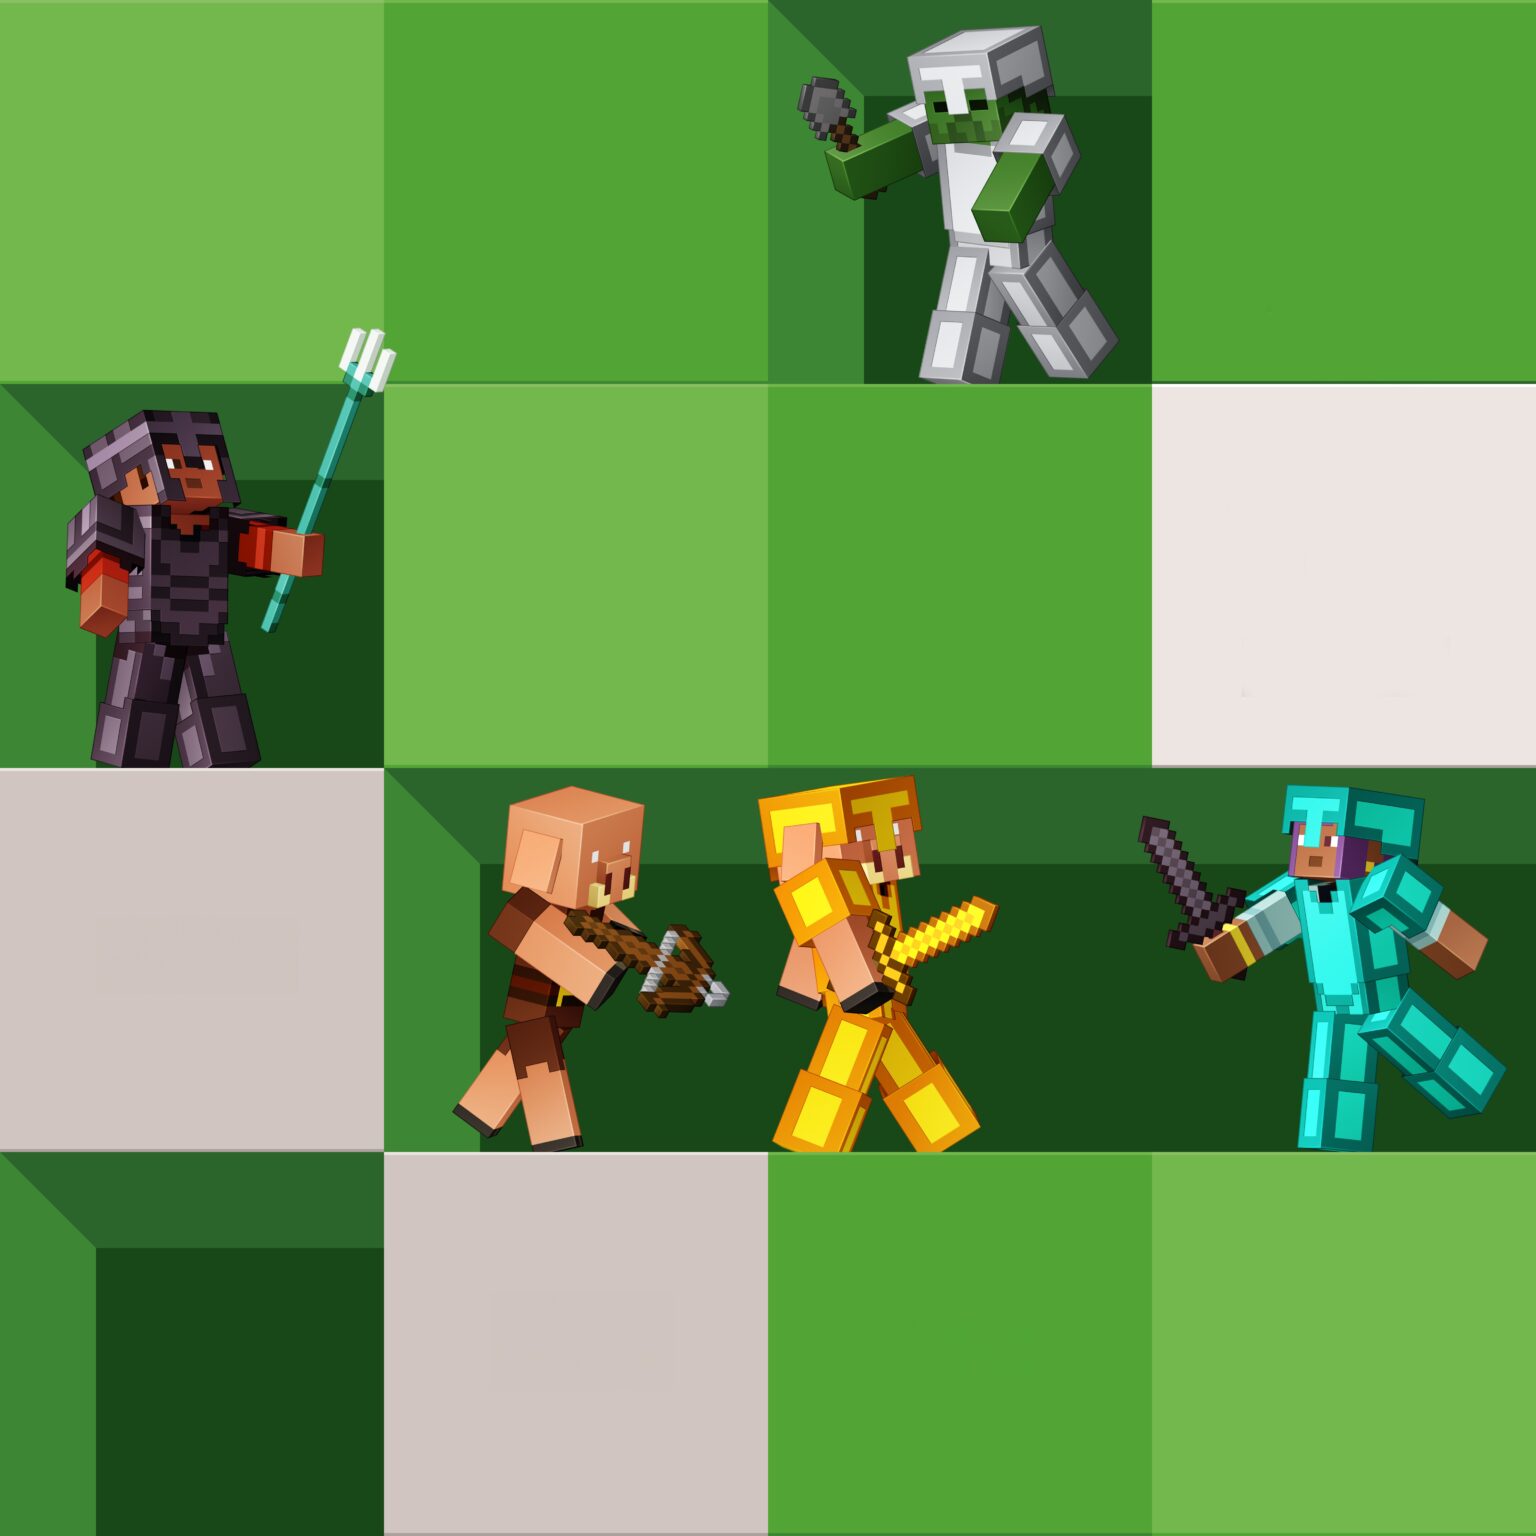 A green square image made up of blocks, with some Minecraft characters dotted throughout the blocks.